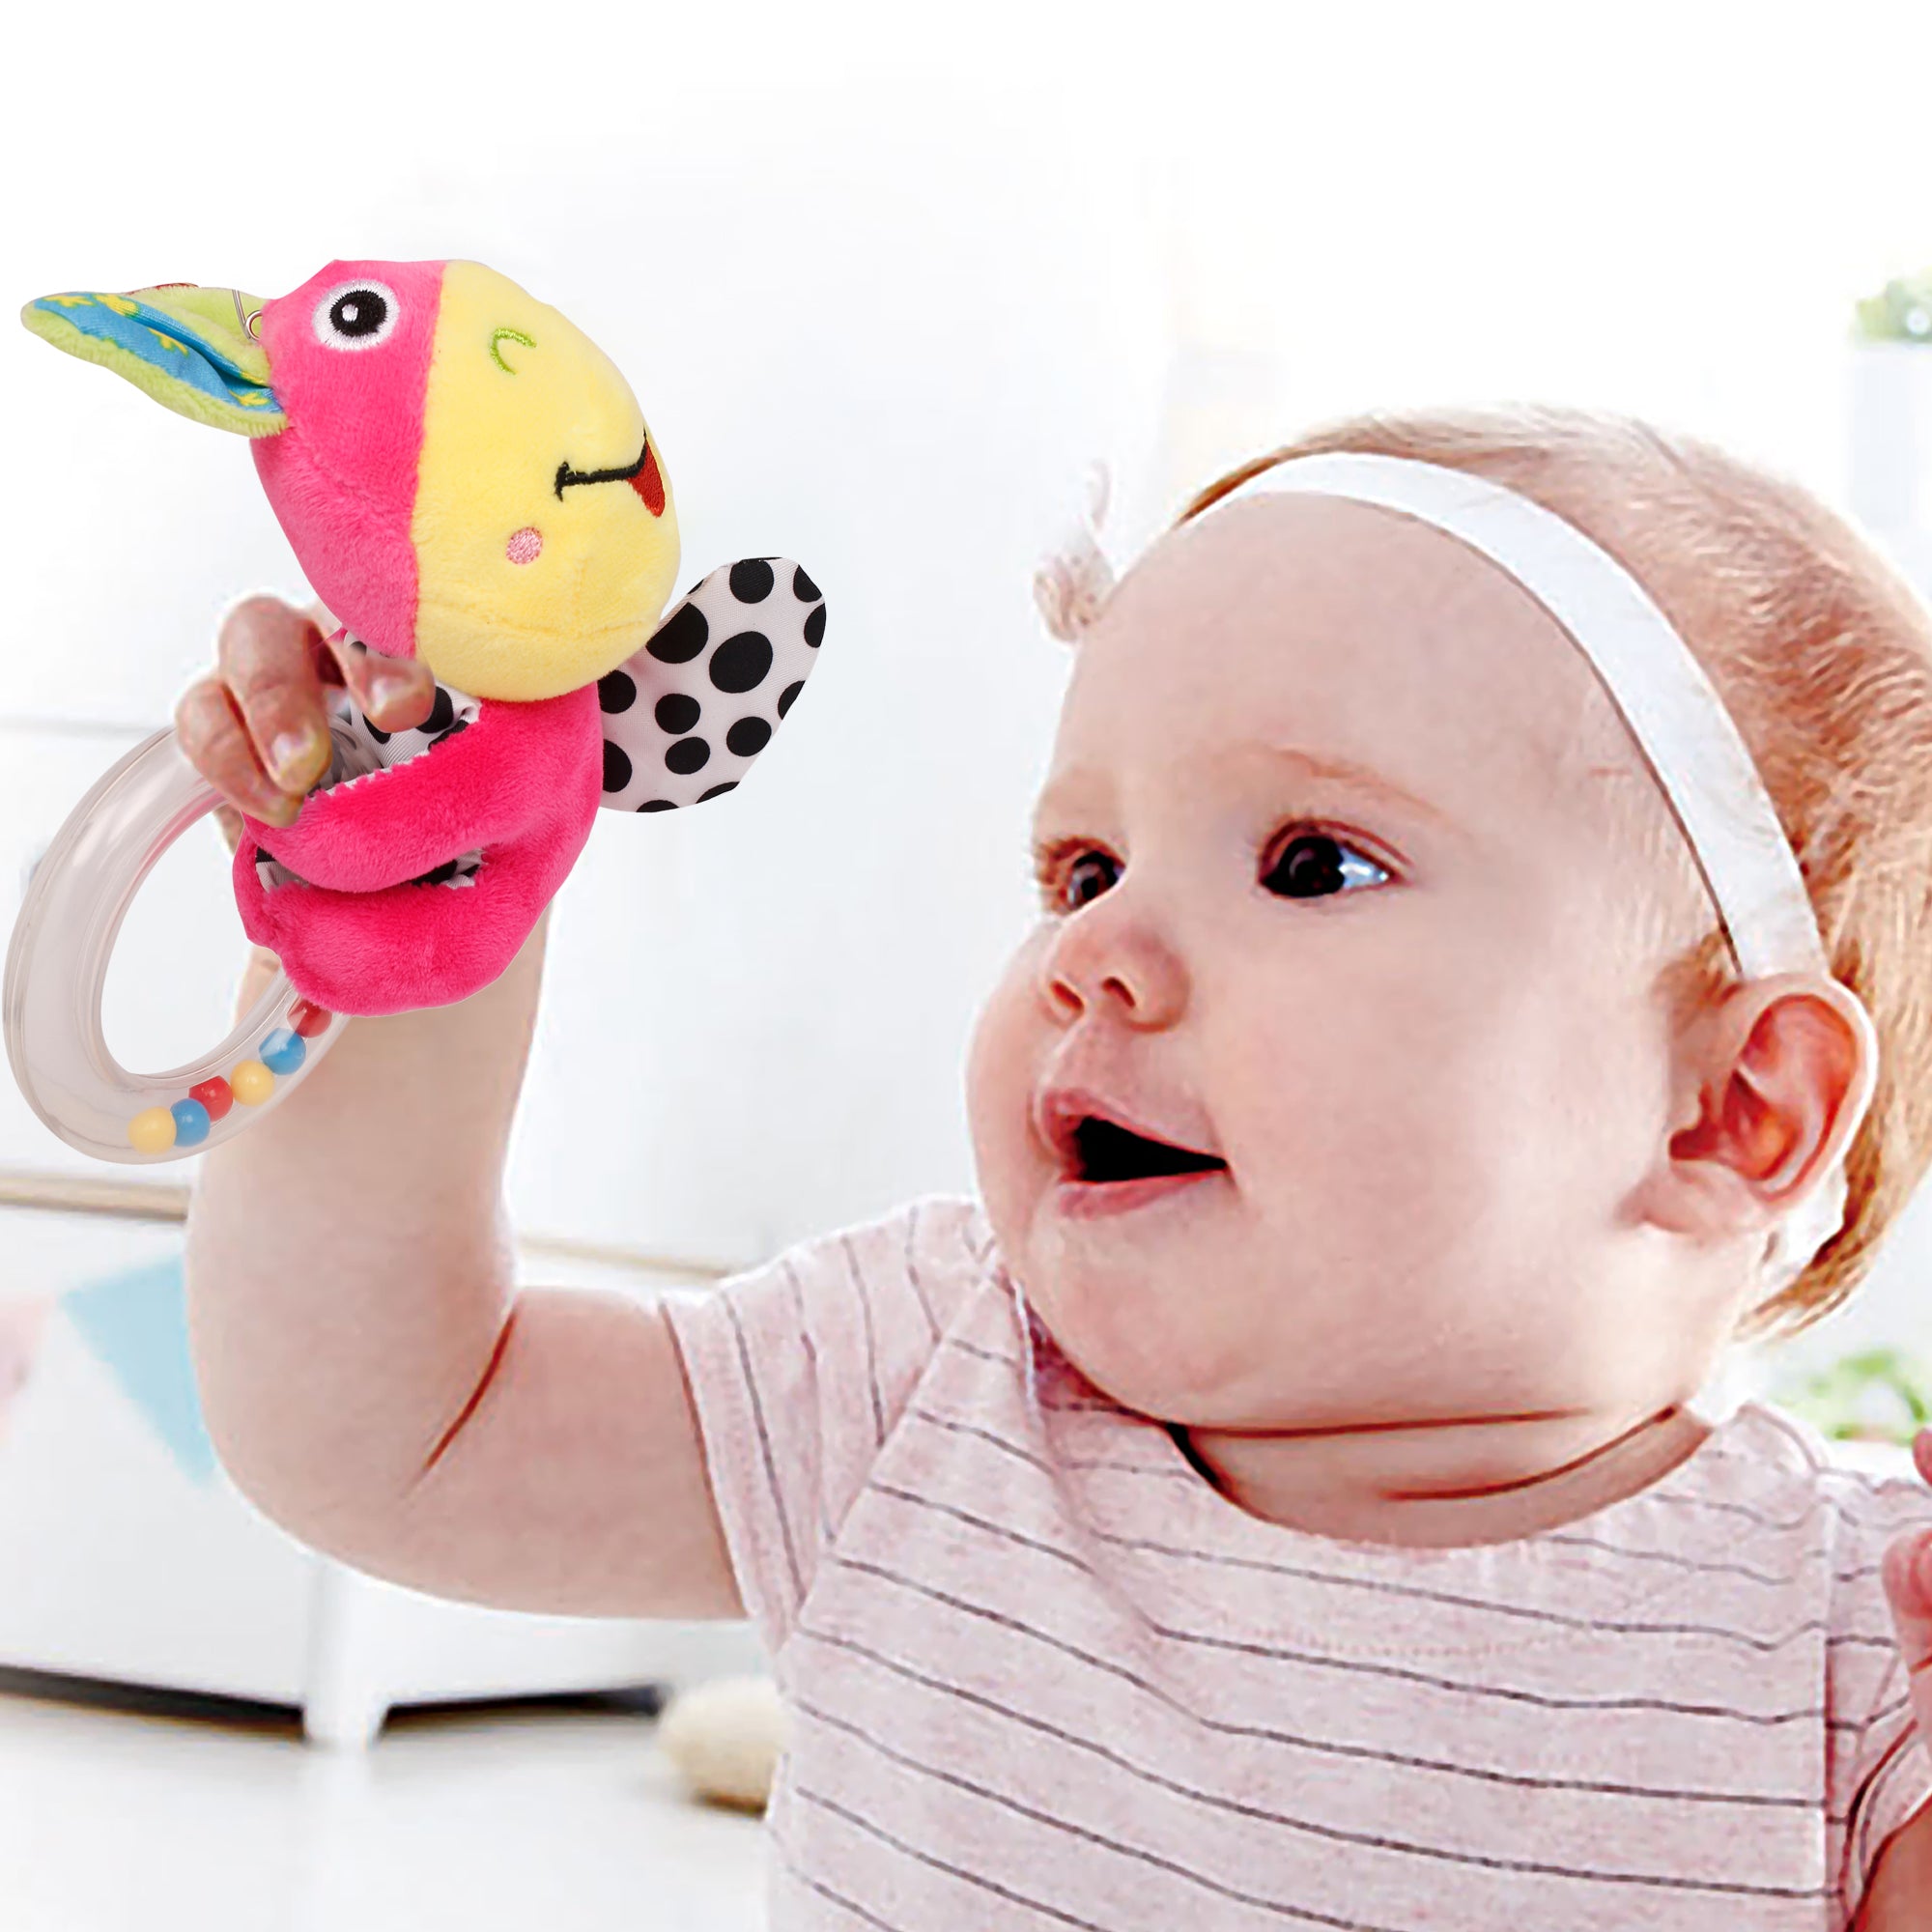 Toys for Newborns, Babies and Infants -VTech Baby